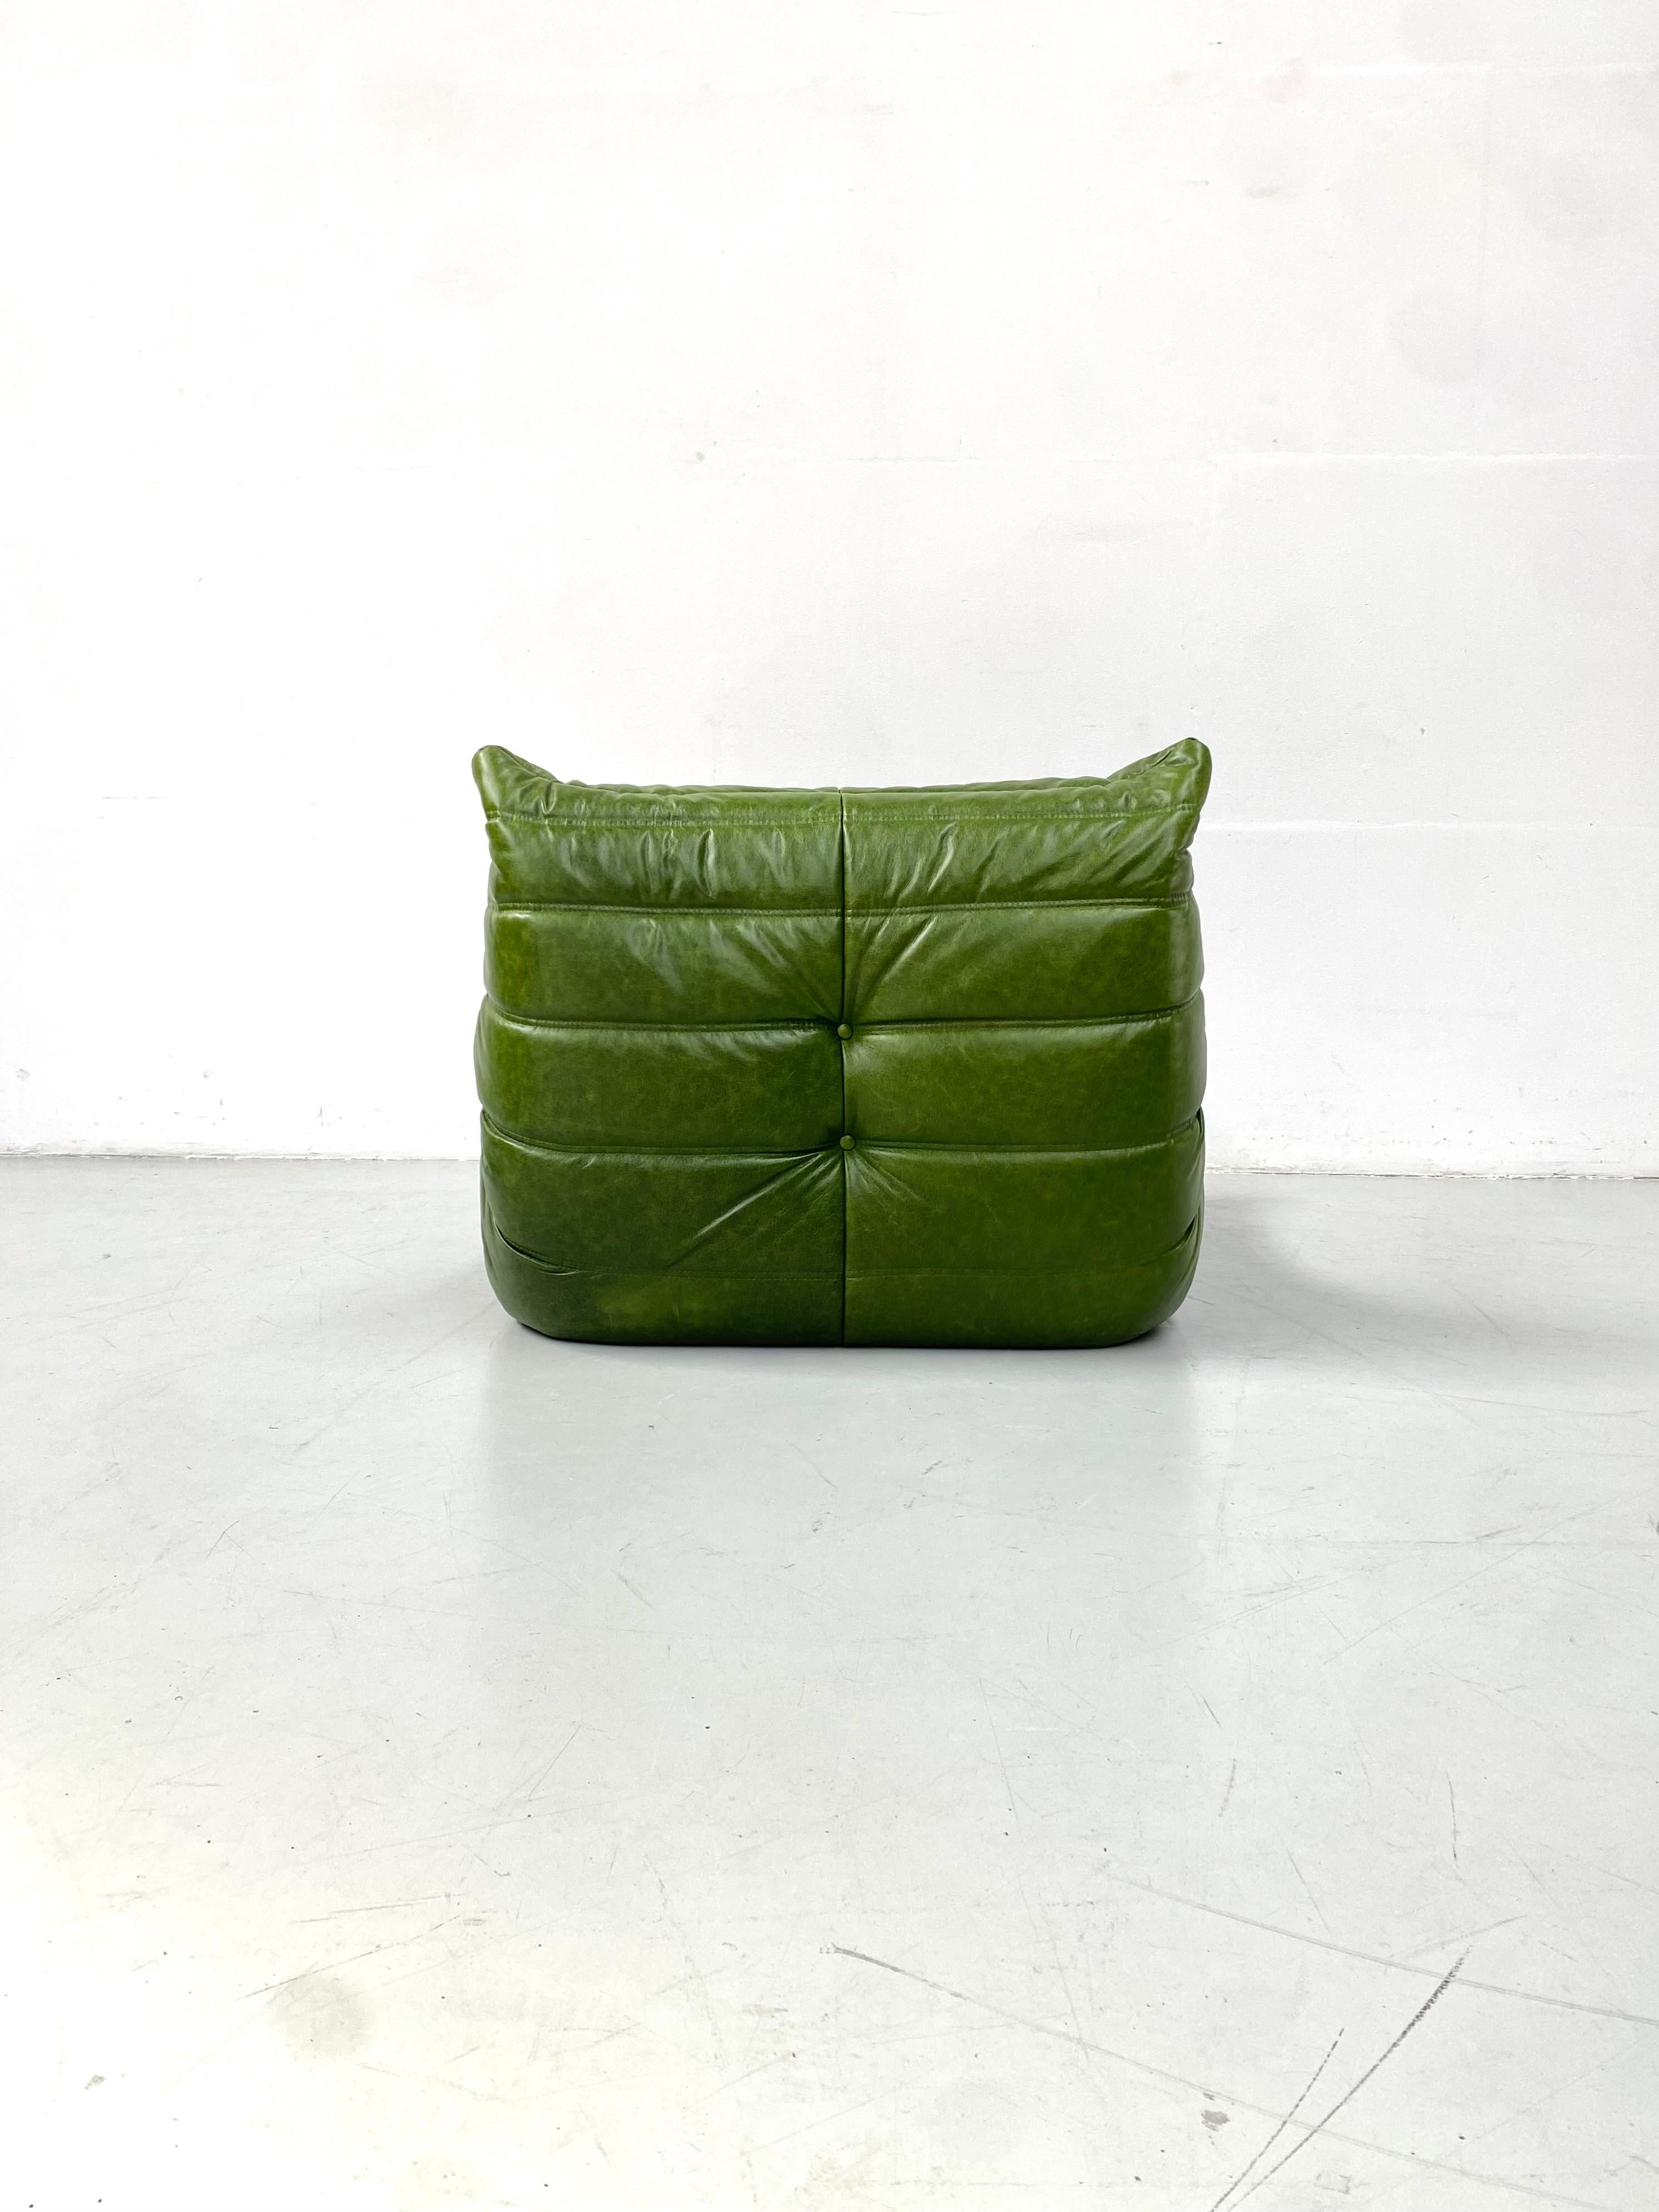 French Togo Chair in Green Leather by Michel Ducaroy for Ligne Roset, 1974. For Sale 4